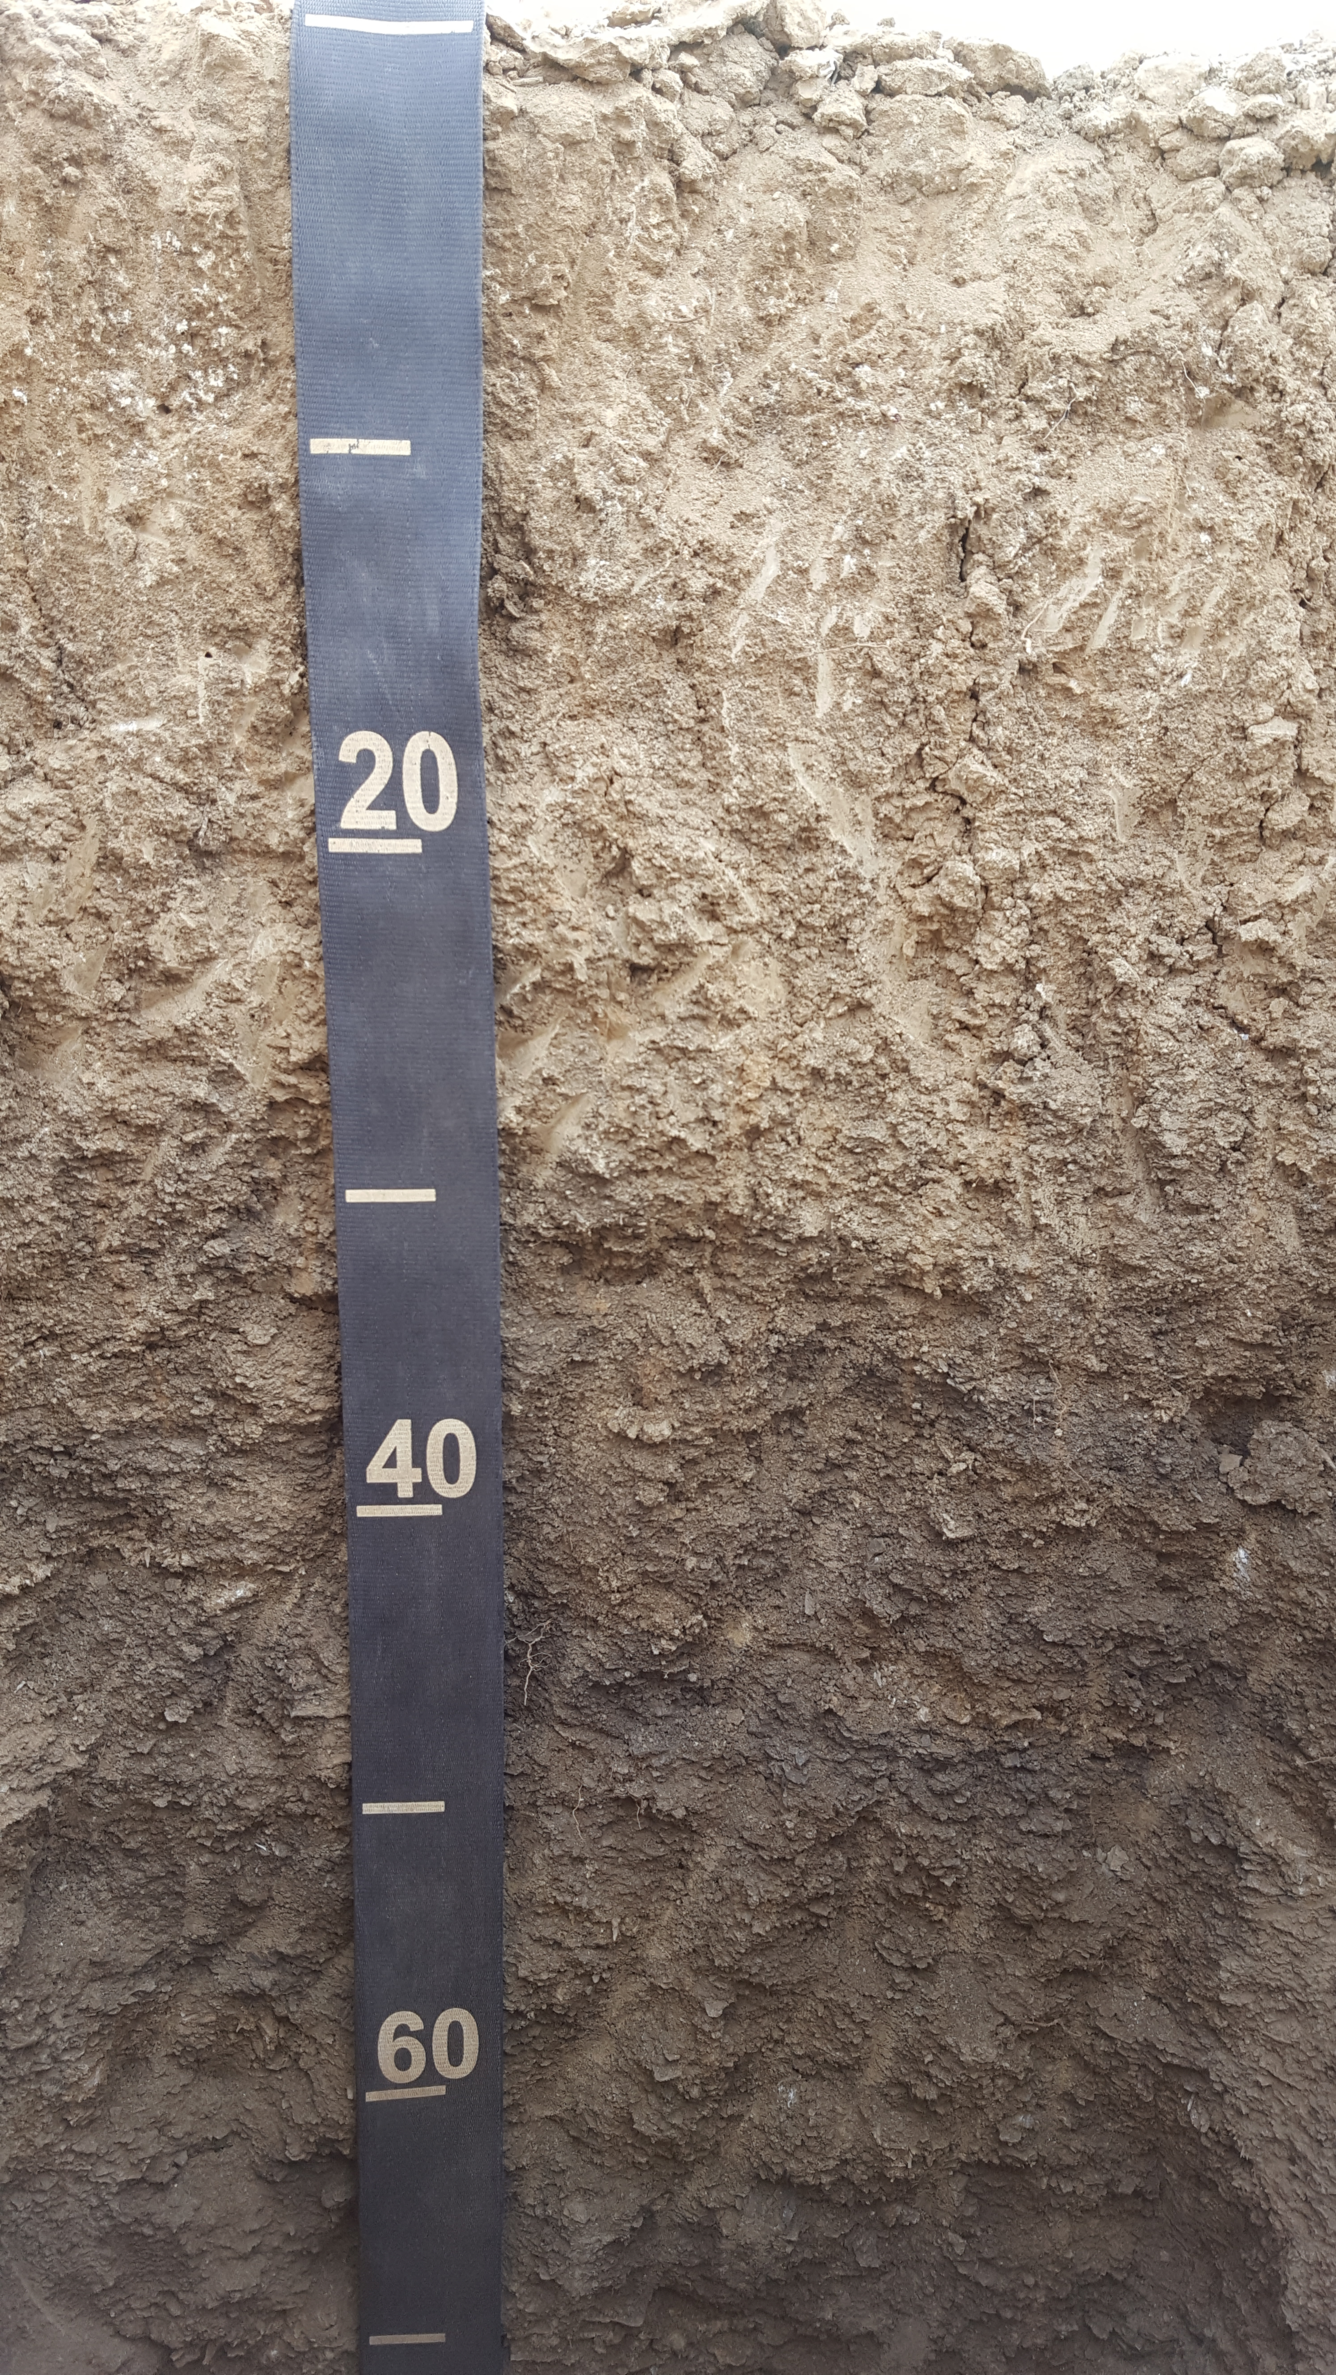 Soil profile in dryland region. The top of the horizon is a light brown and the bottom half of the horizon is darker in color.